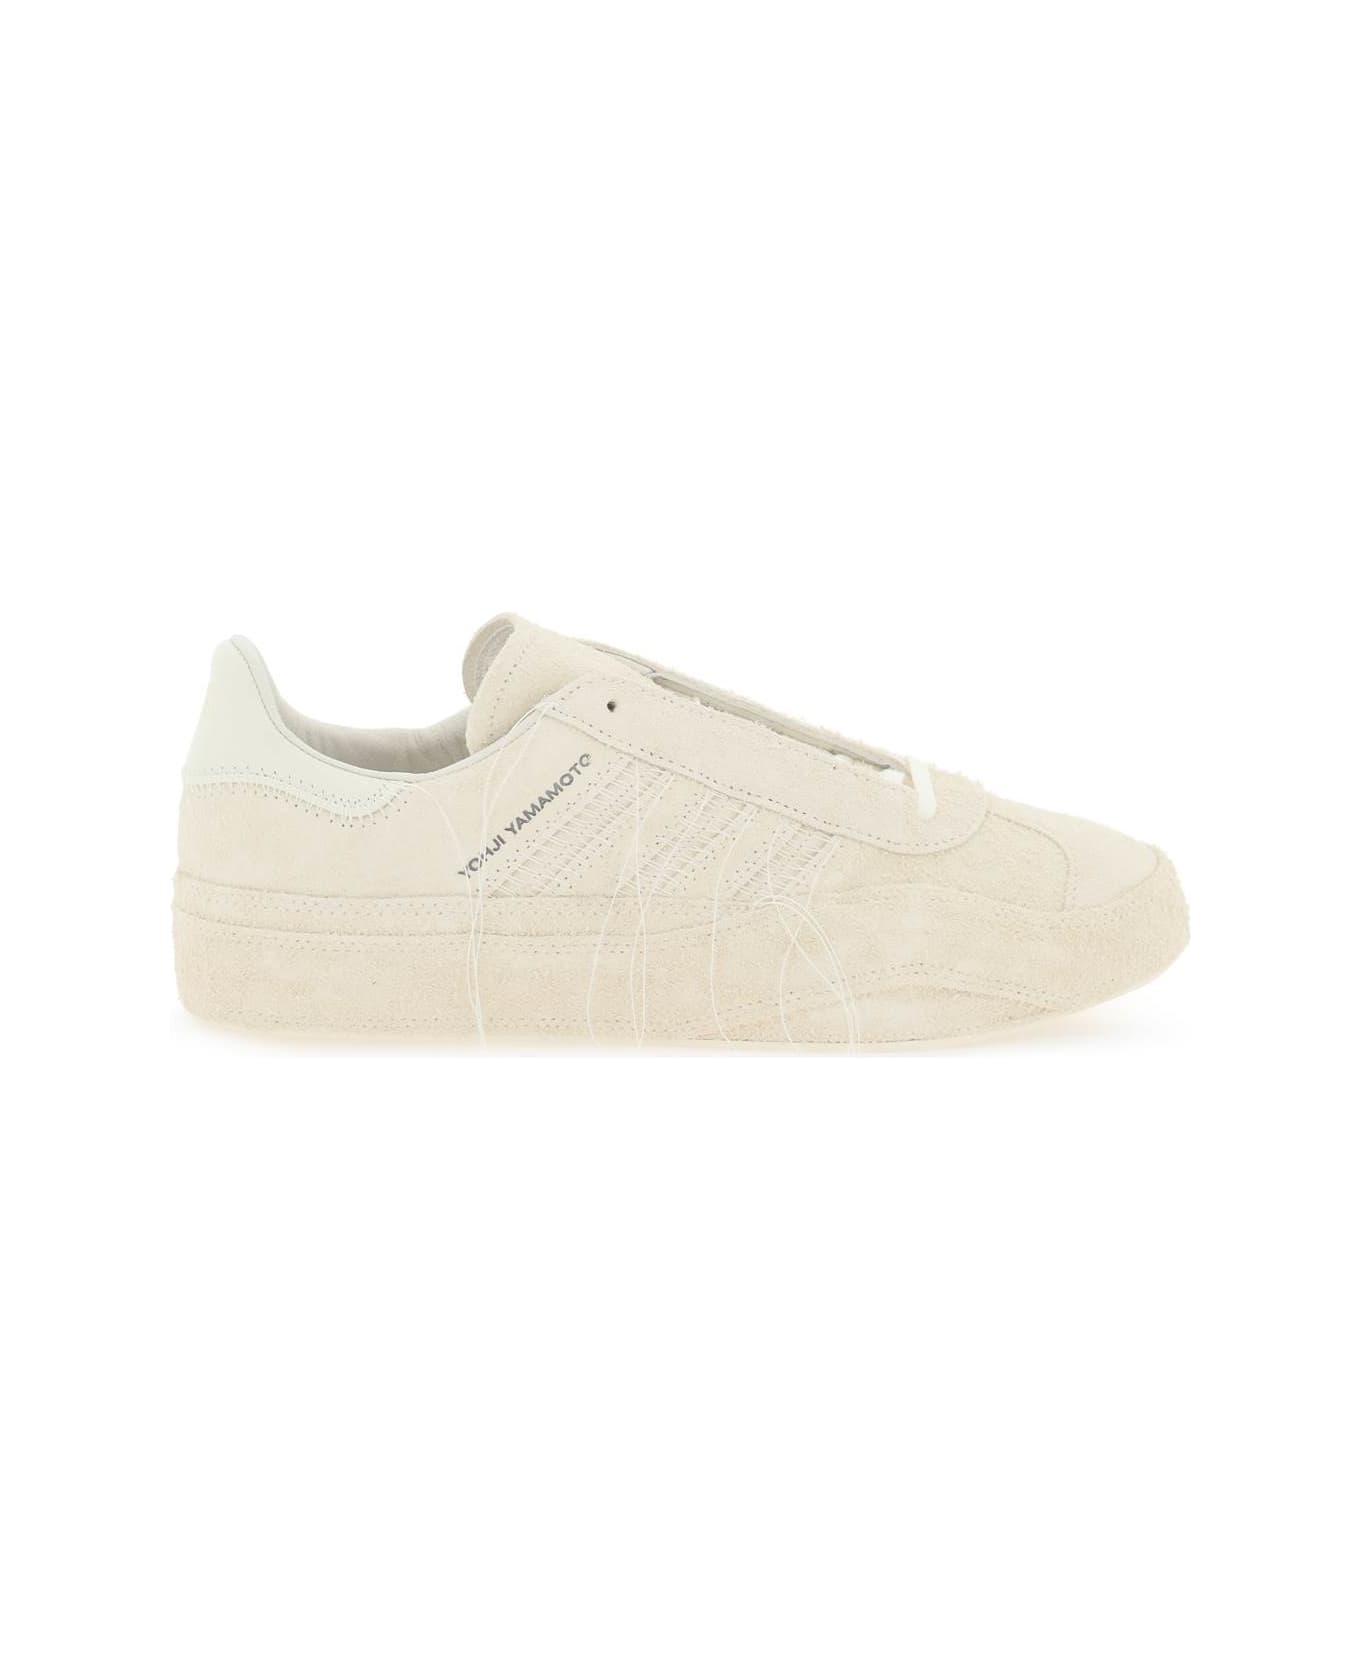 Y-3 Gazelle Ivory Suede Sneakers - White スニーカー